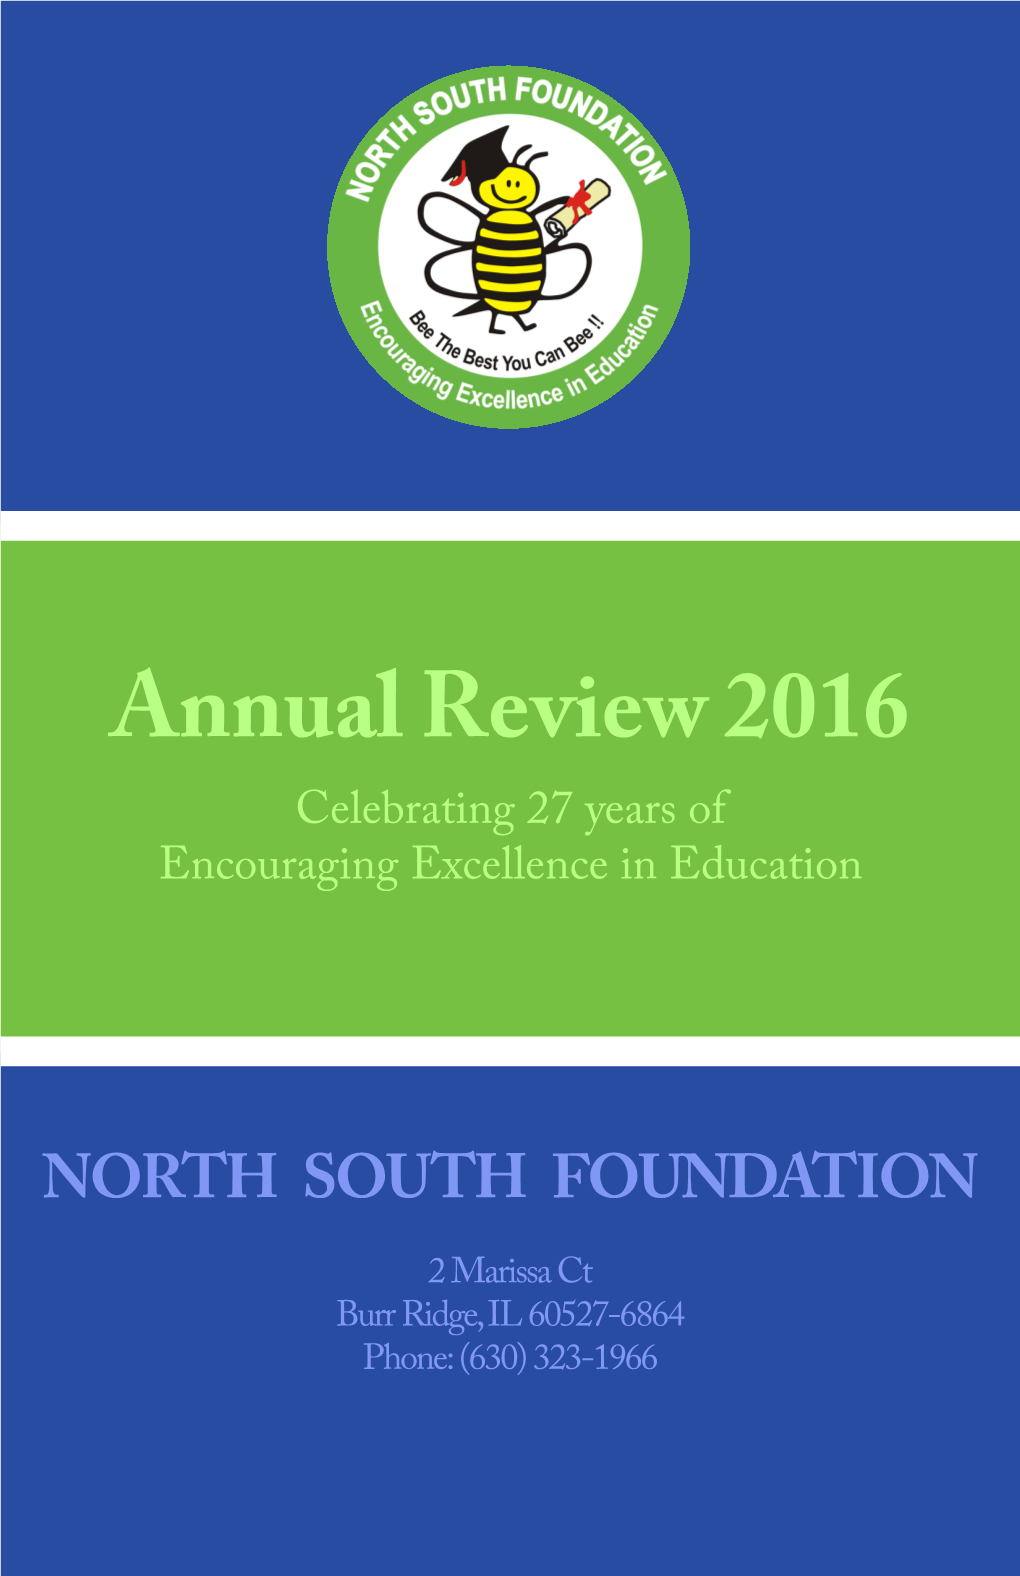 Annual Review 2016 Celebrating 27 Years of Encouraging Excellence in Education